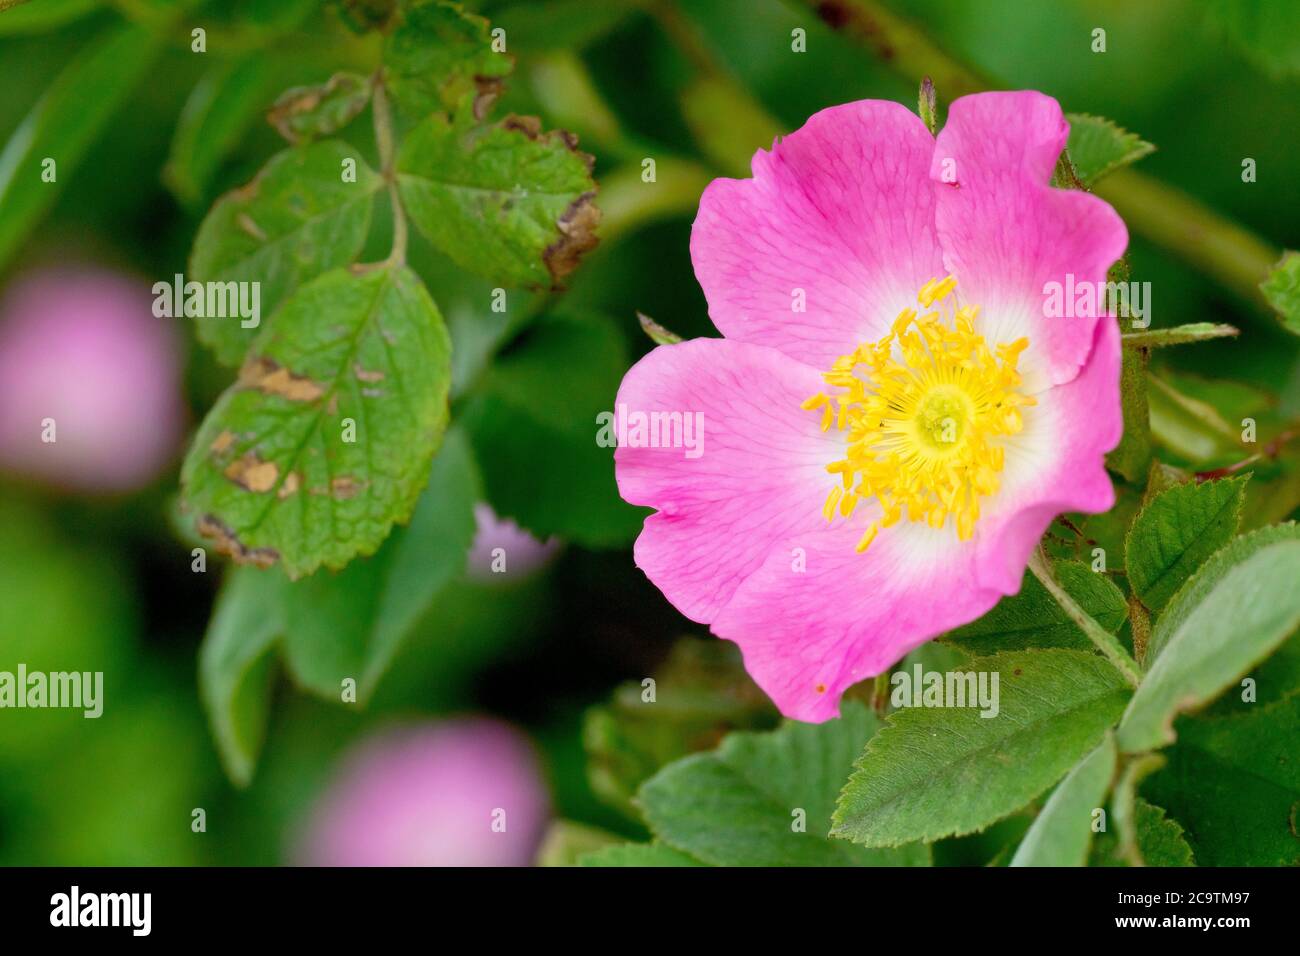 Wild Rose, probably a Downy Rose (rosa tomentosa, rosa sherardii, rosa mollis), close up of a single flower. Stock Photo